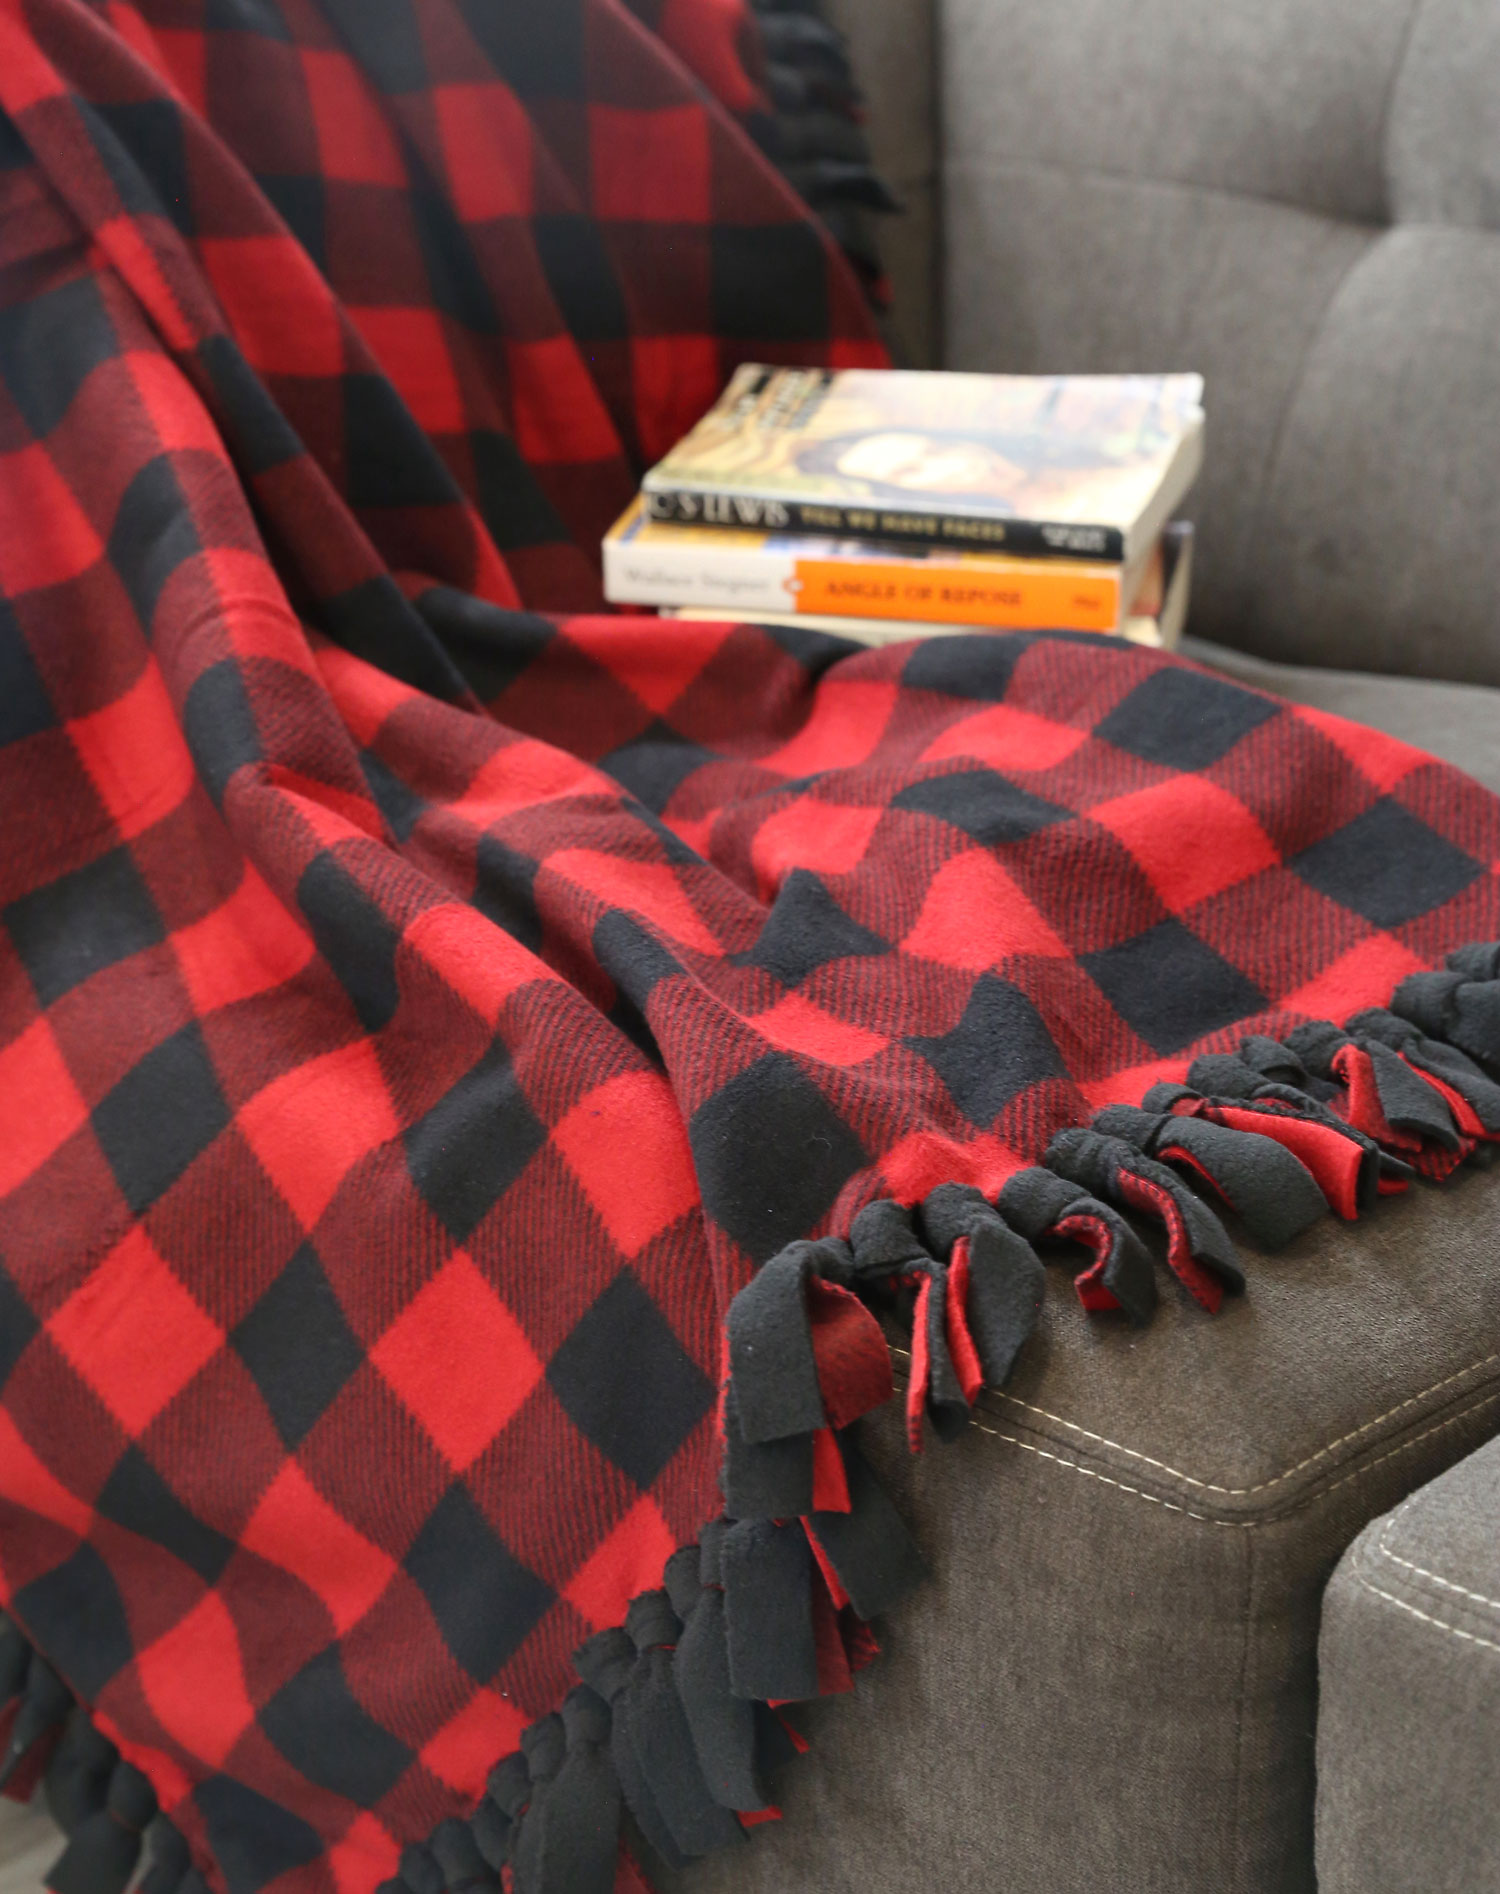 How to Make a Tied Fleece Blanket (No Sewing Required!) - FeltMagnet